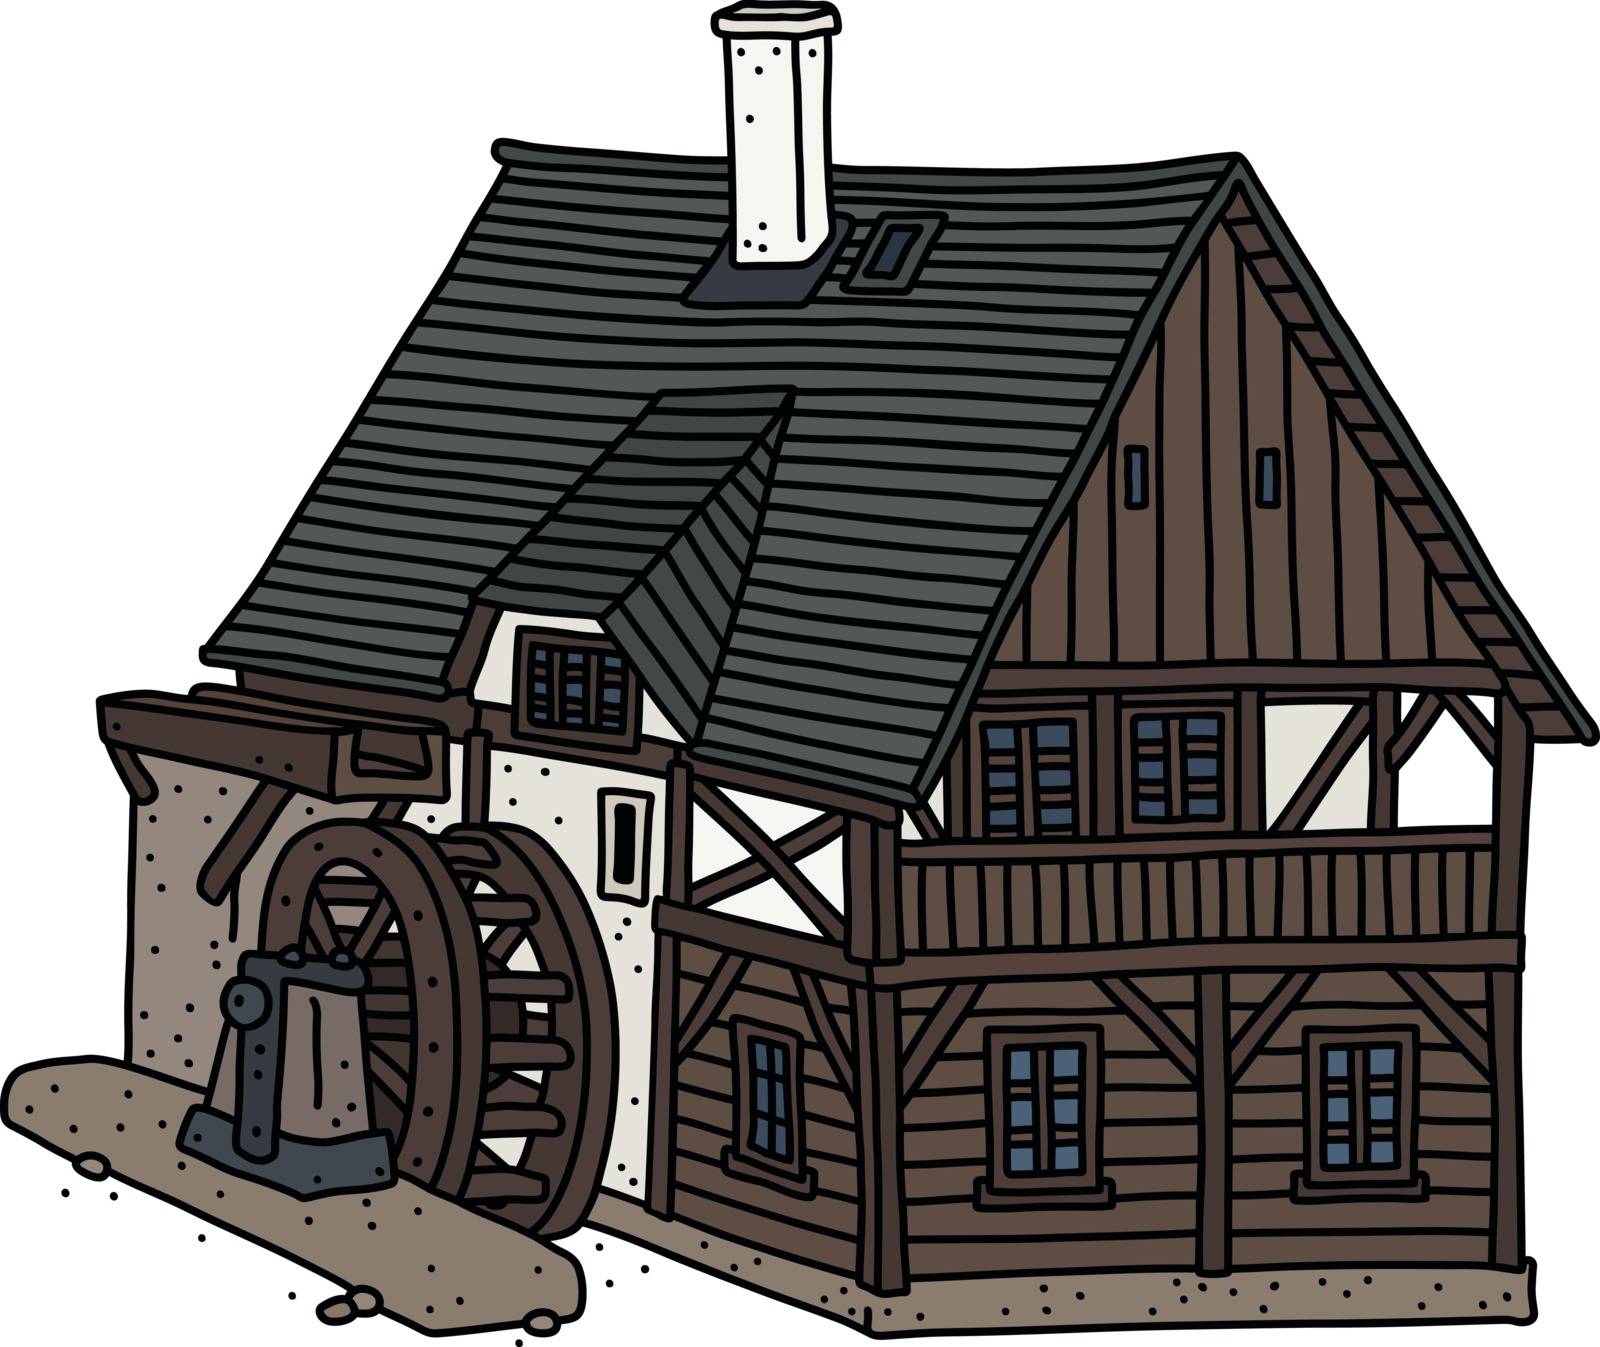 The vectorized hand drawing of a historical half timbered watter mill